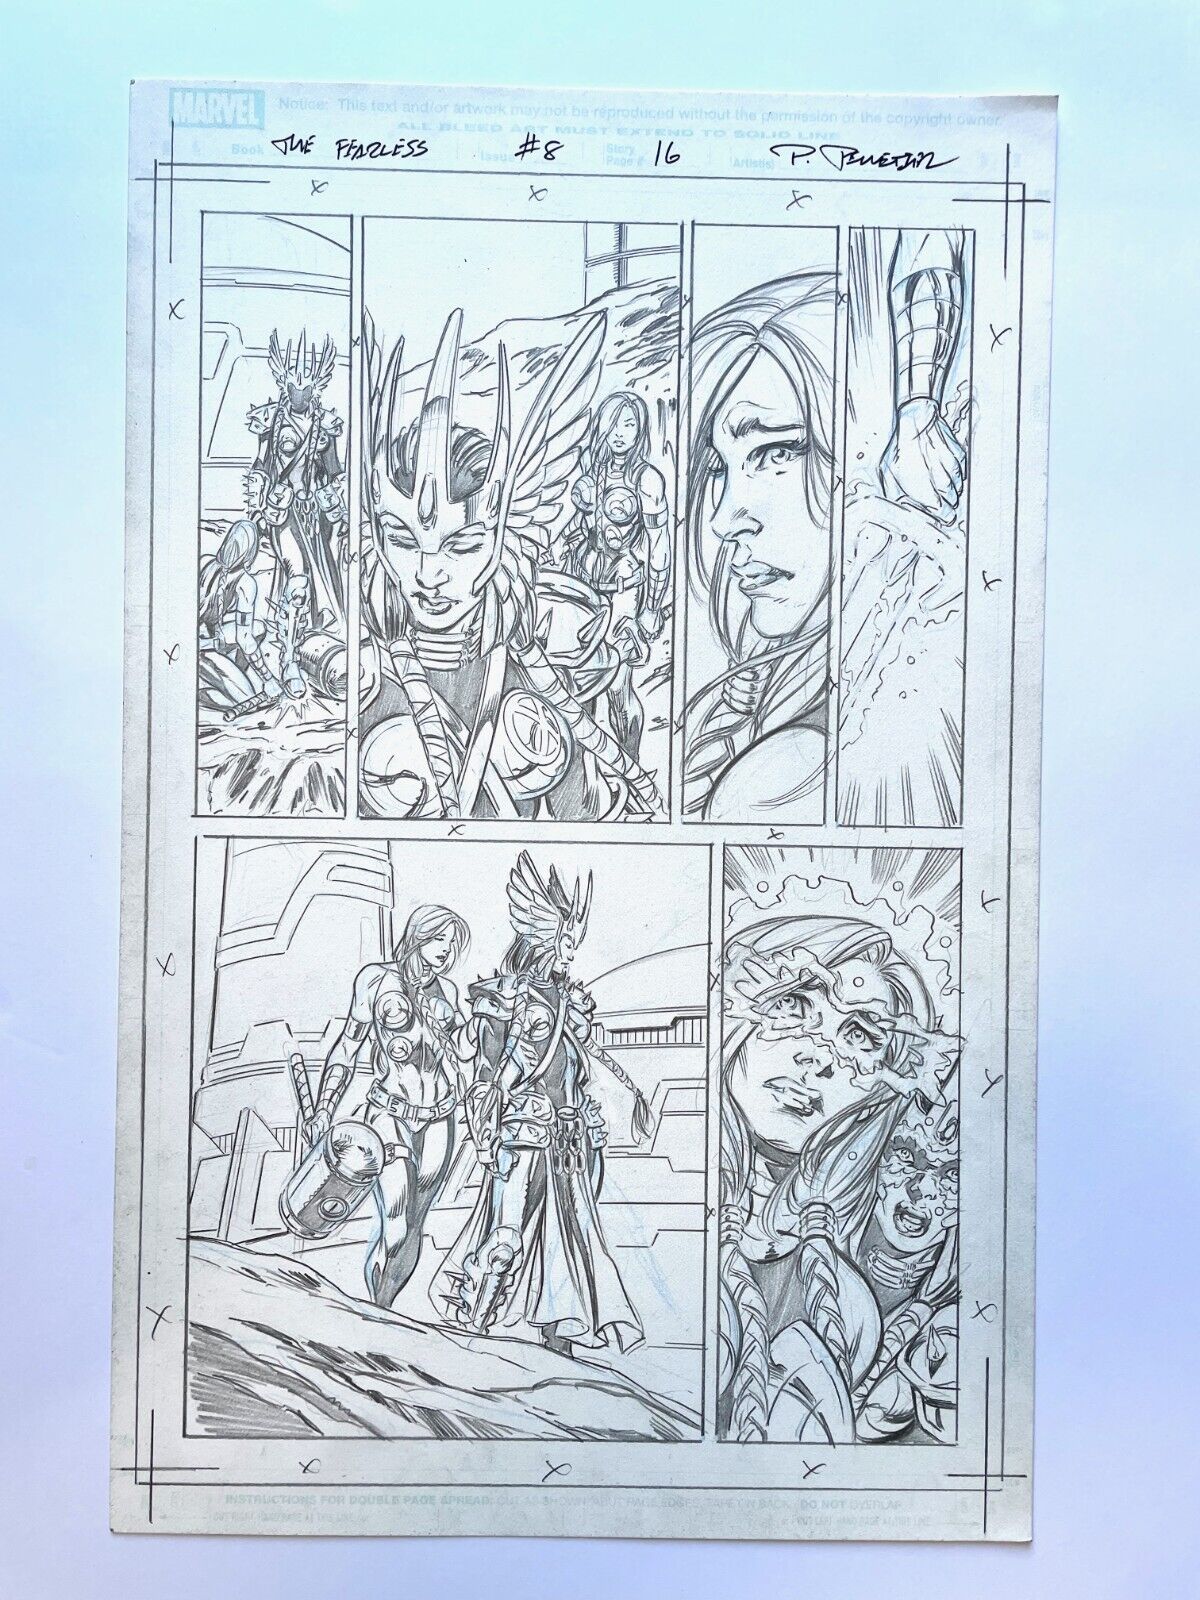 SIGNED PUBLISHED PAUL PELLETIER MARVEL THE FEARLESS #8, PG 16 MAGICK, VALKYRIE